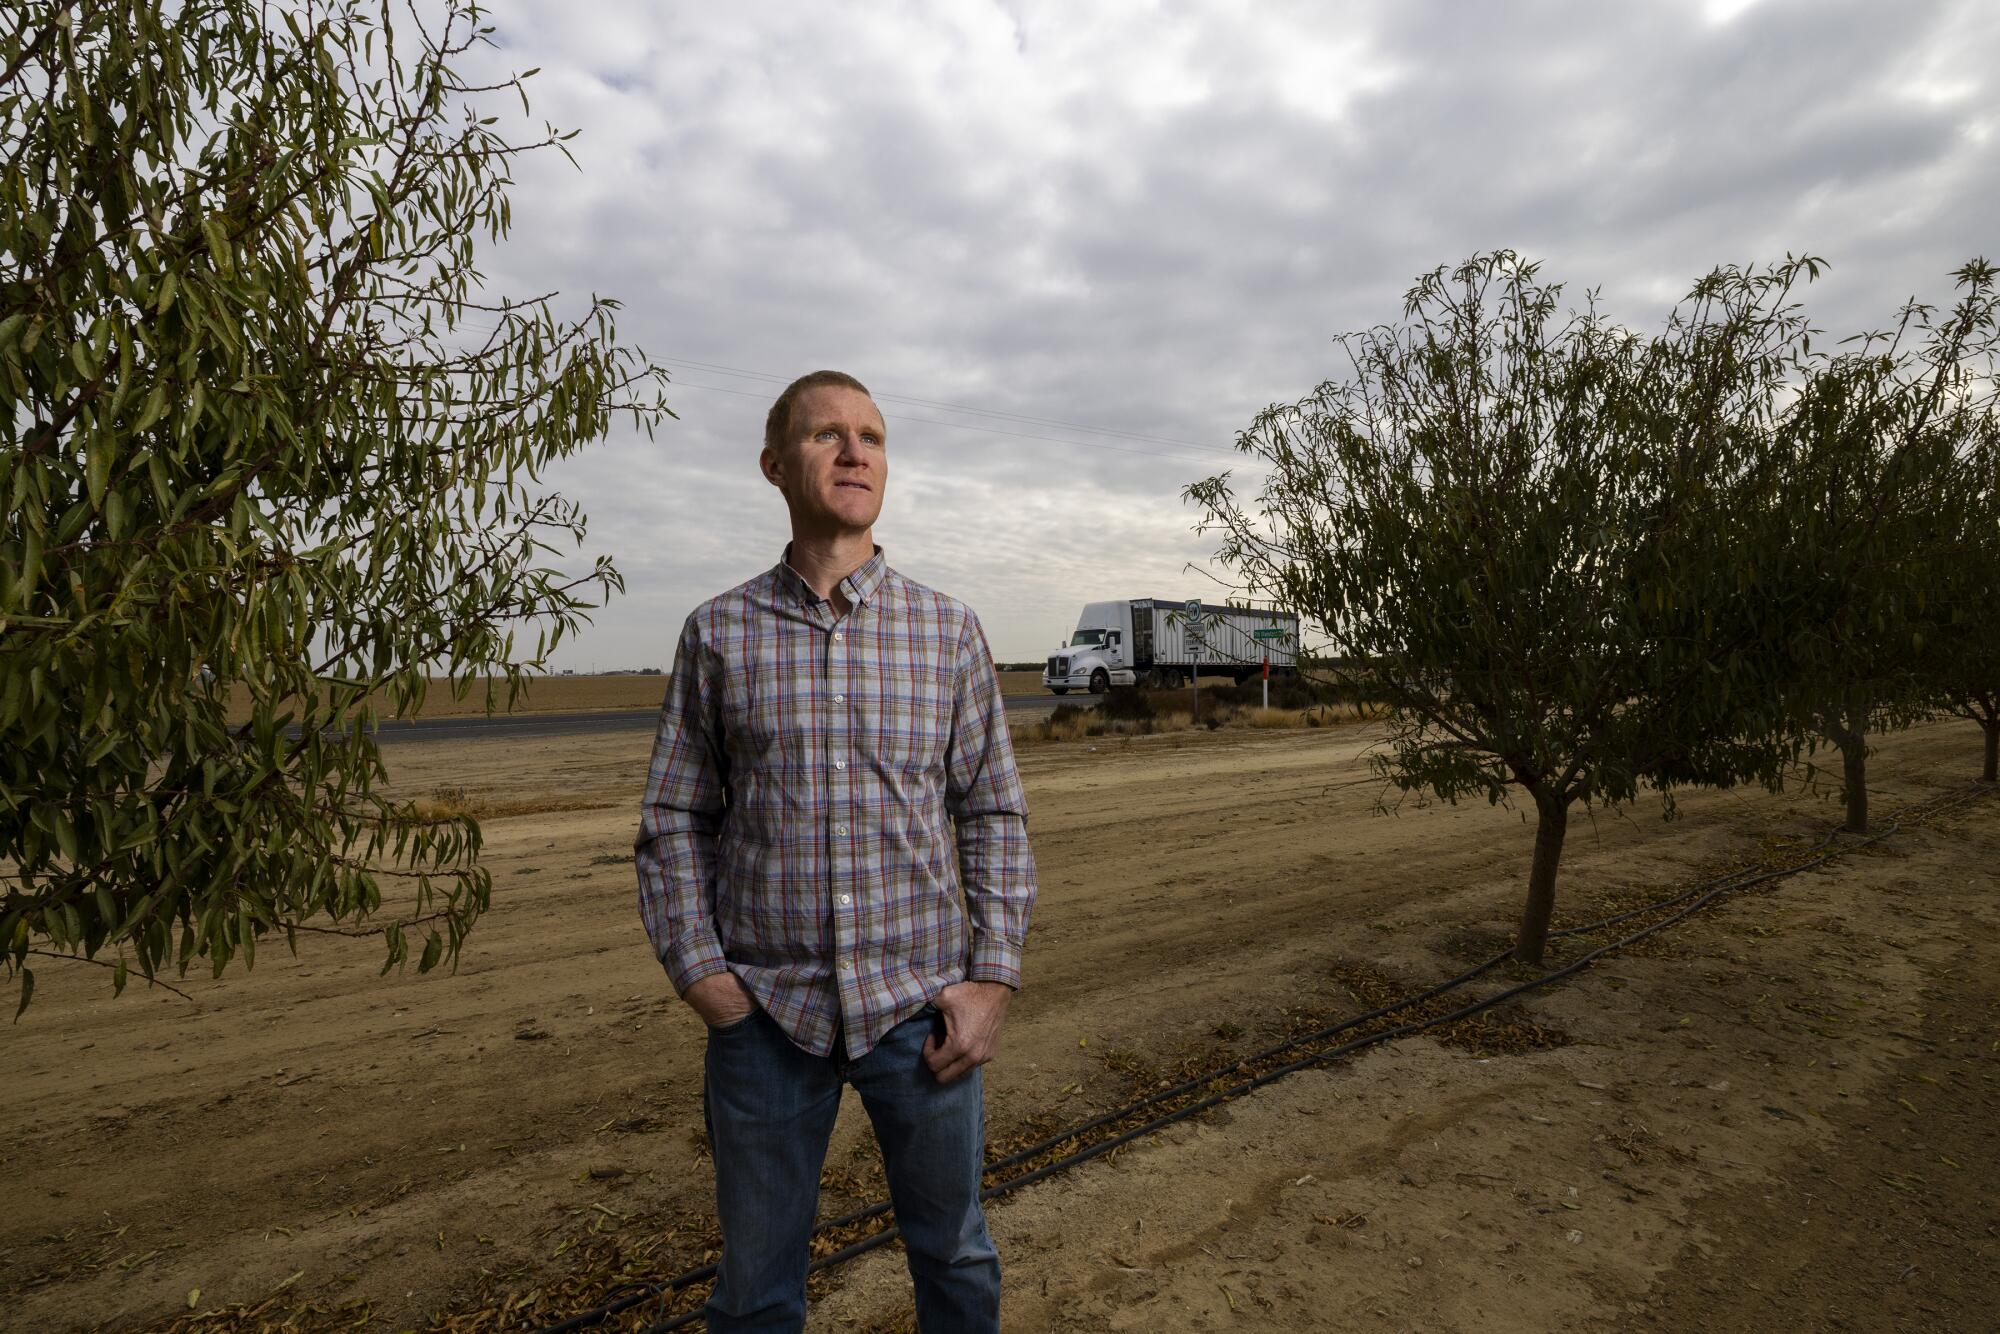 Daniel Palla stands among trees on farmland as a truck passes in the background.